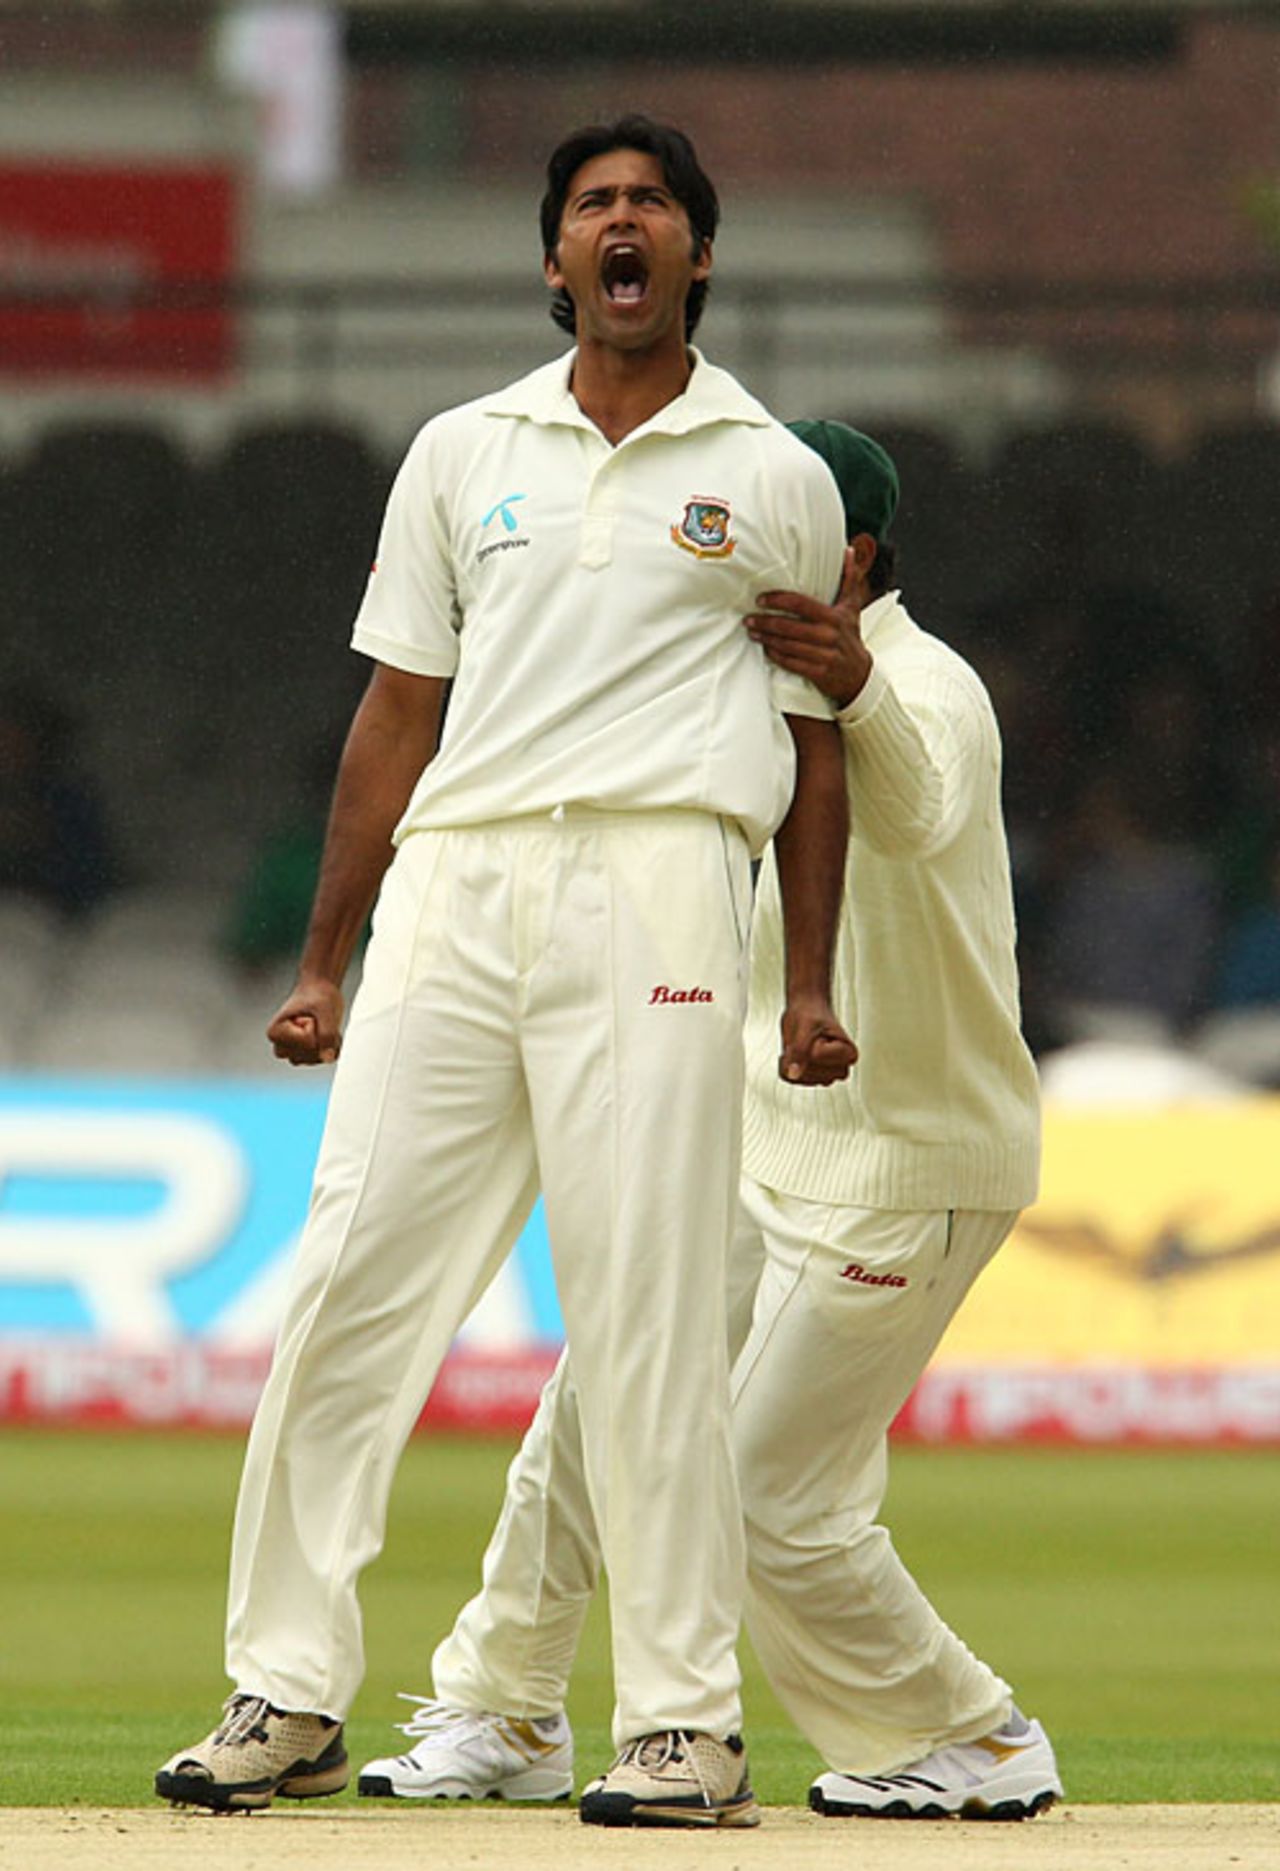 Shahadat Hossain lets out a roar after claiming his first wicket, England v Bangladesh, 1st Test, Lord's, May 27, 2010